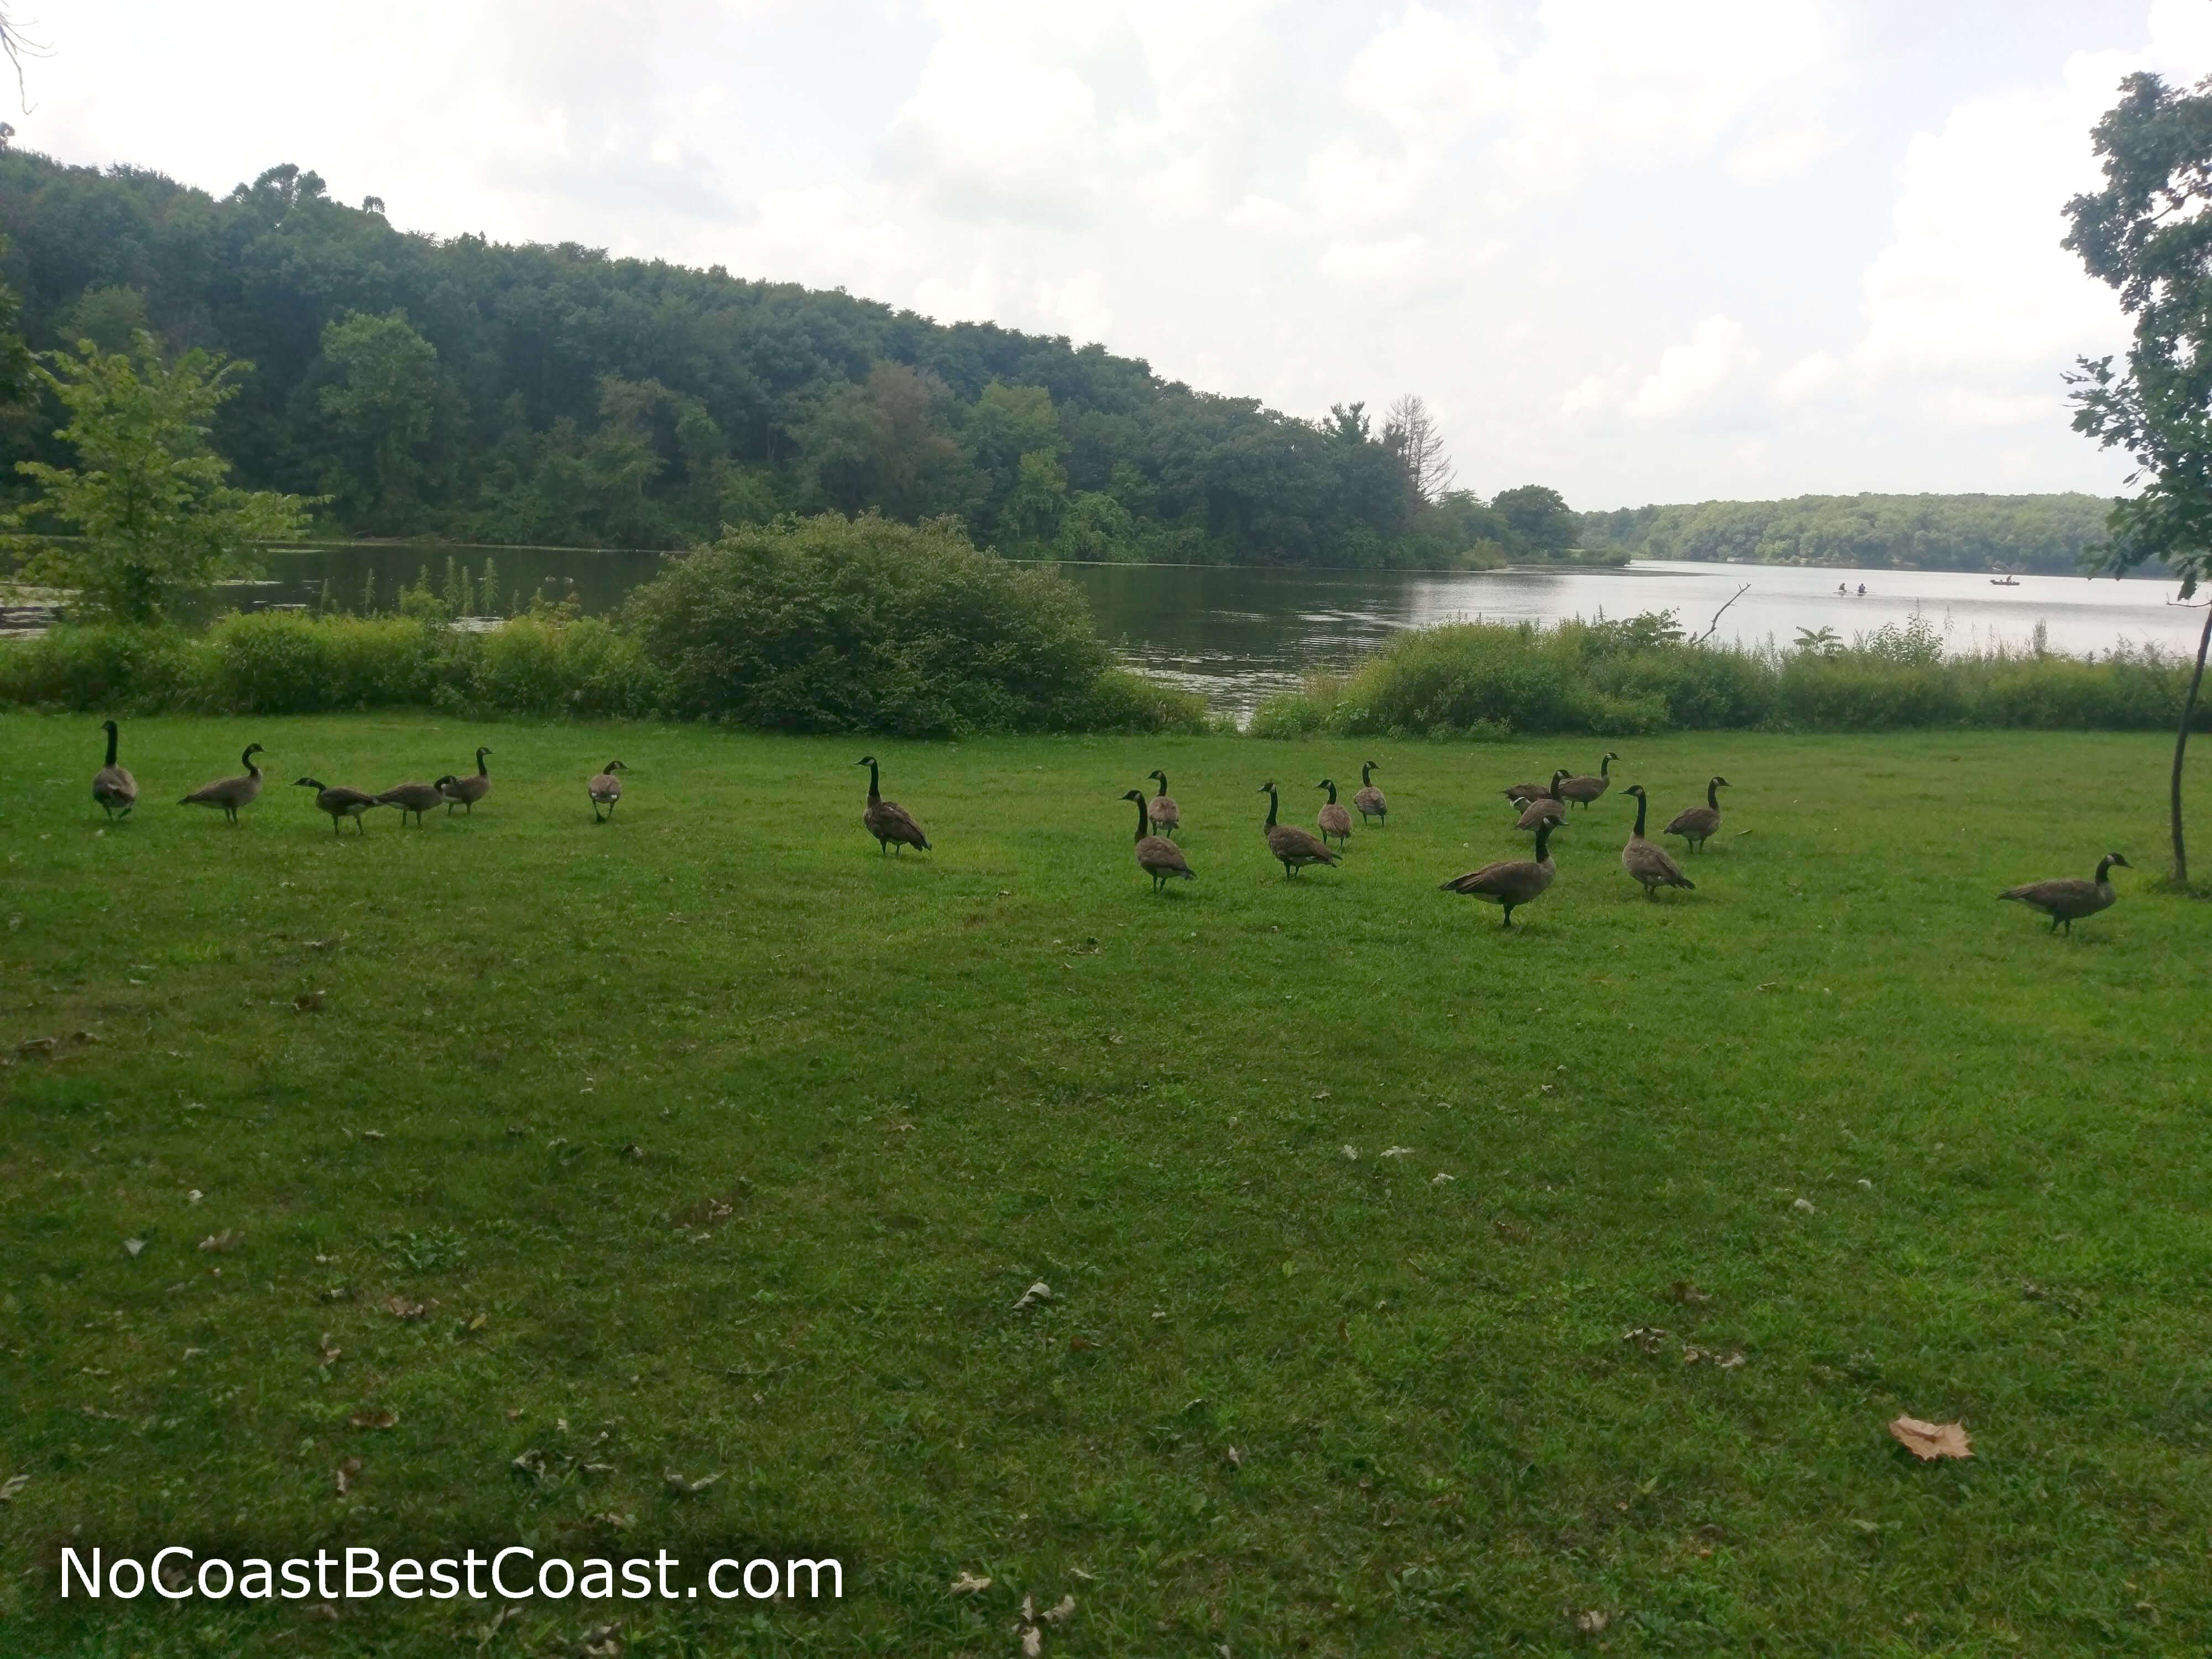 Hordes of geese hanging out in the grass by the lake